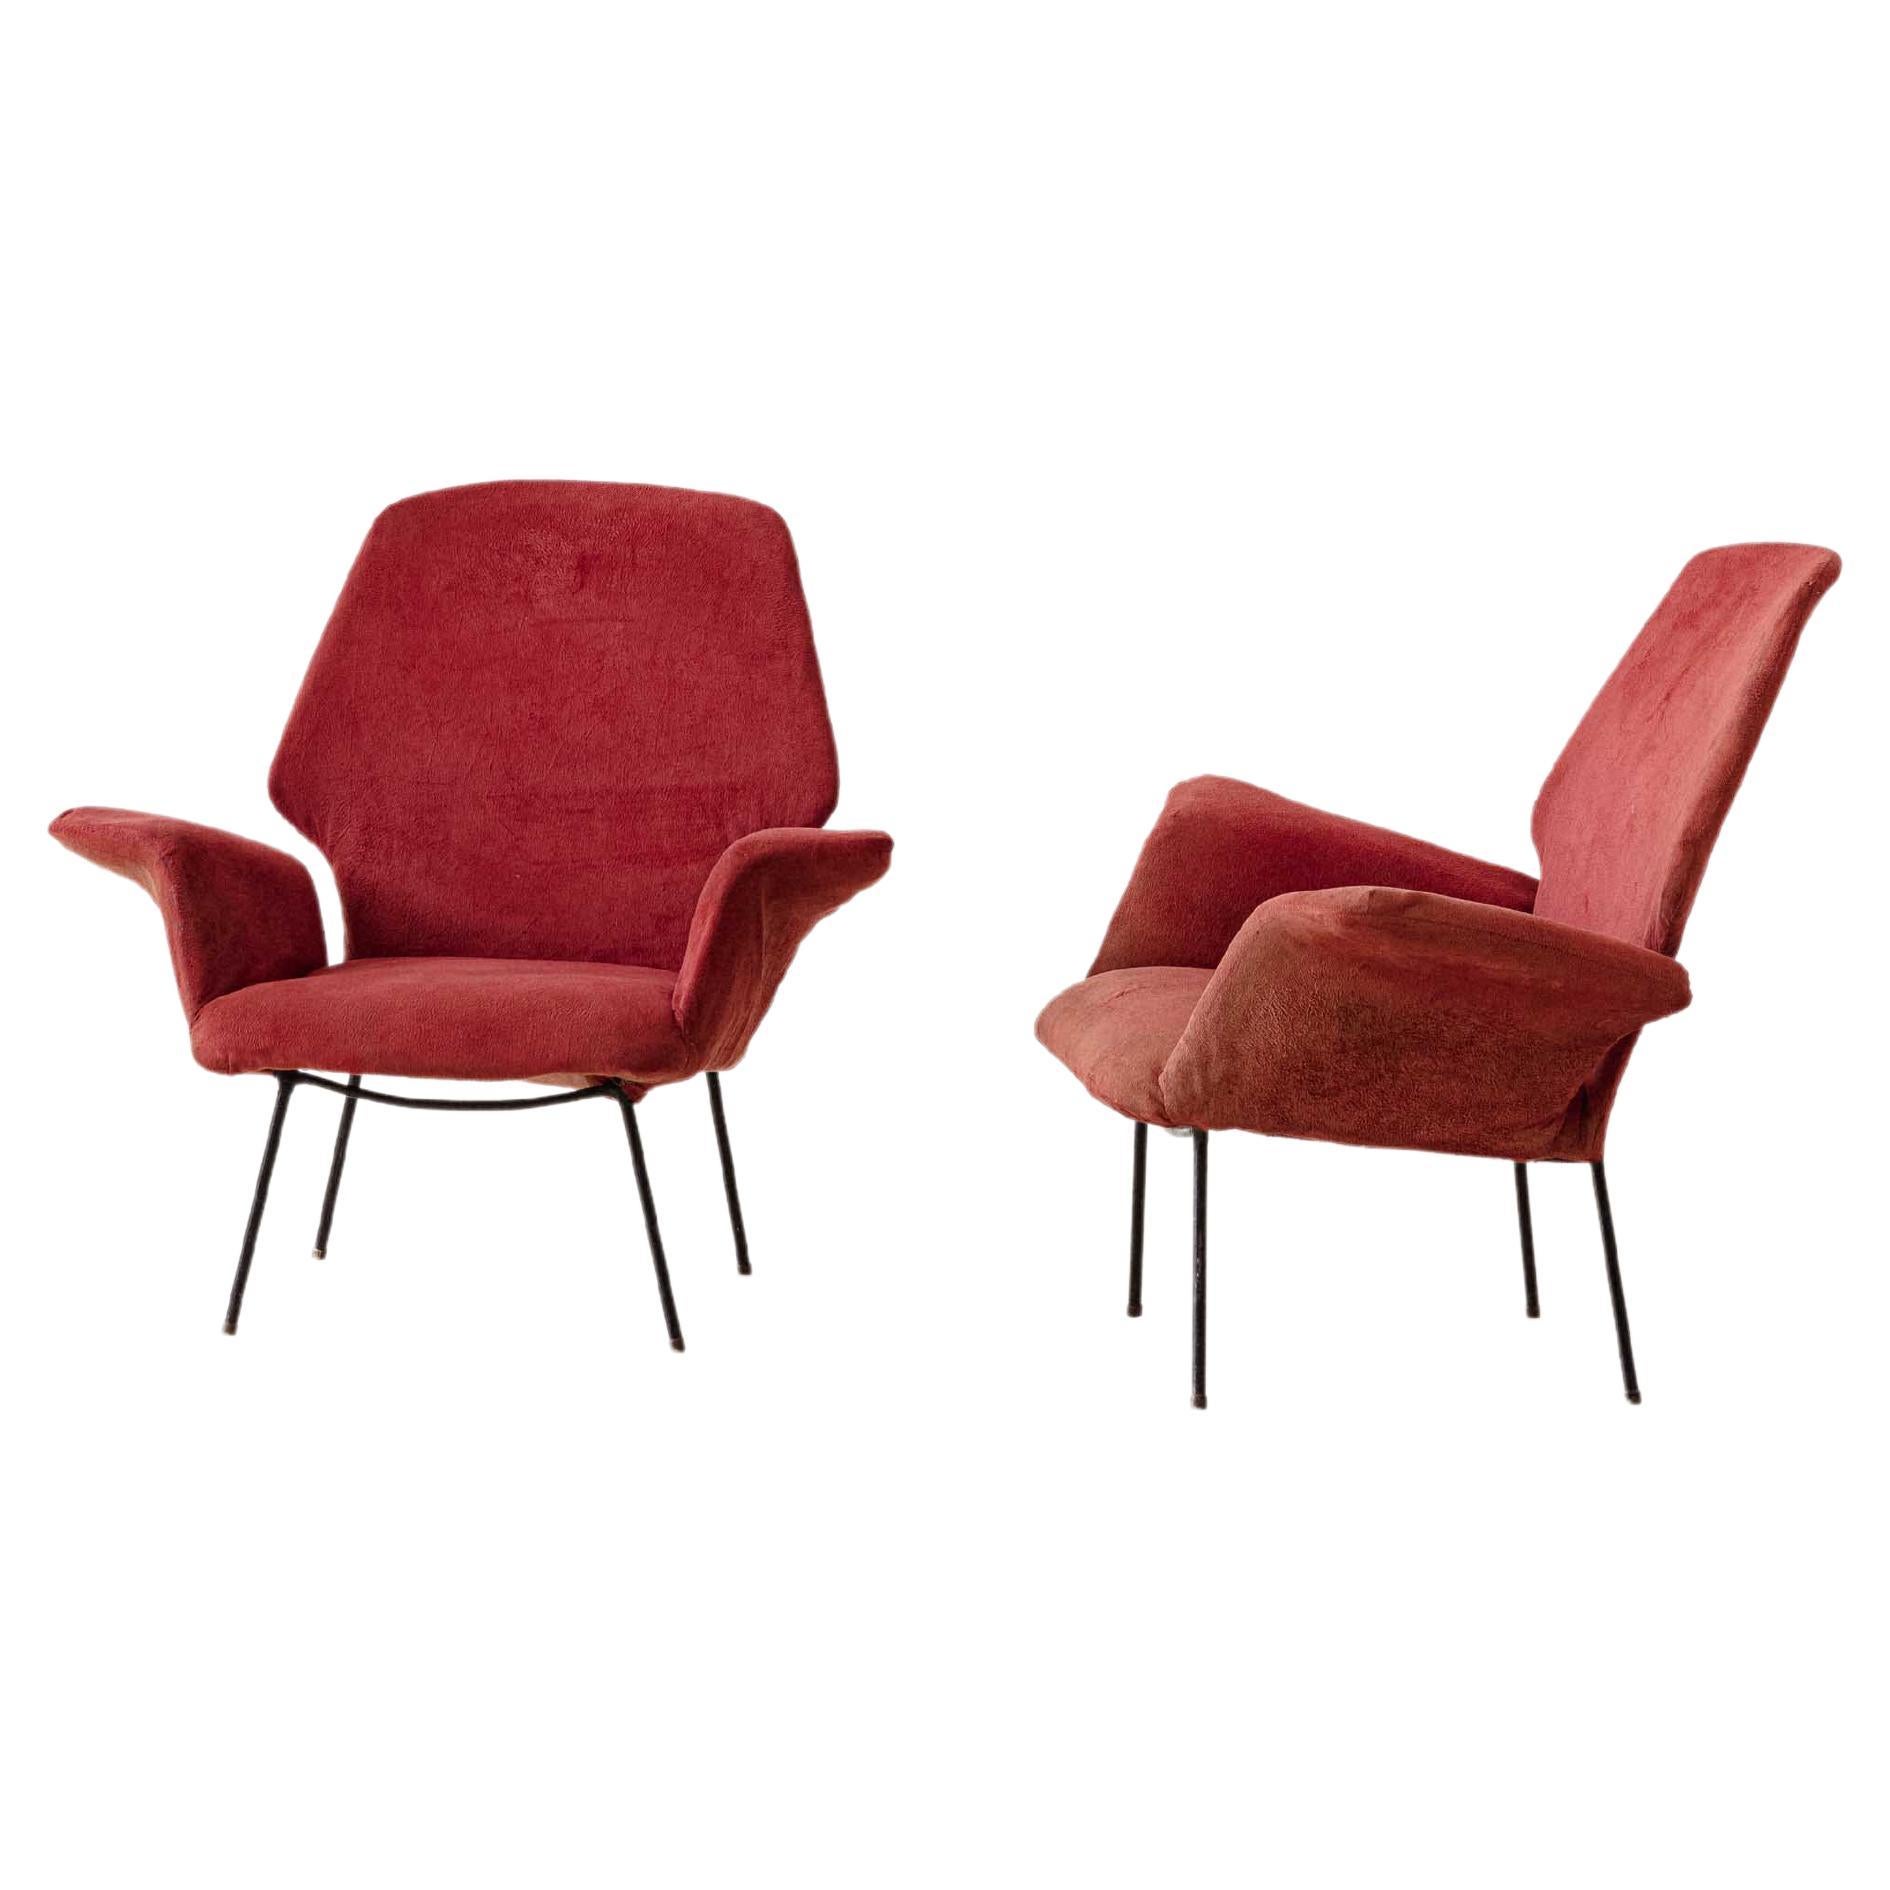 Pair of Armchairs by Carlo Hauner and Martin Eisler, Brazilian Midcentury, 1955 For Sale